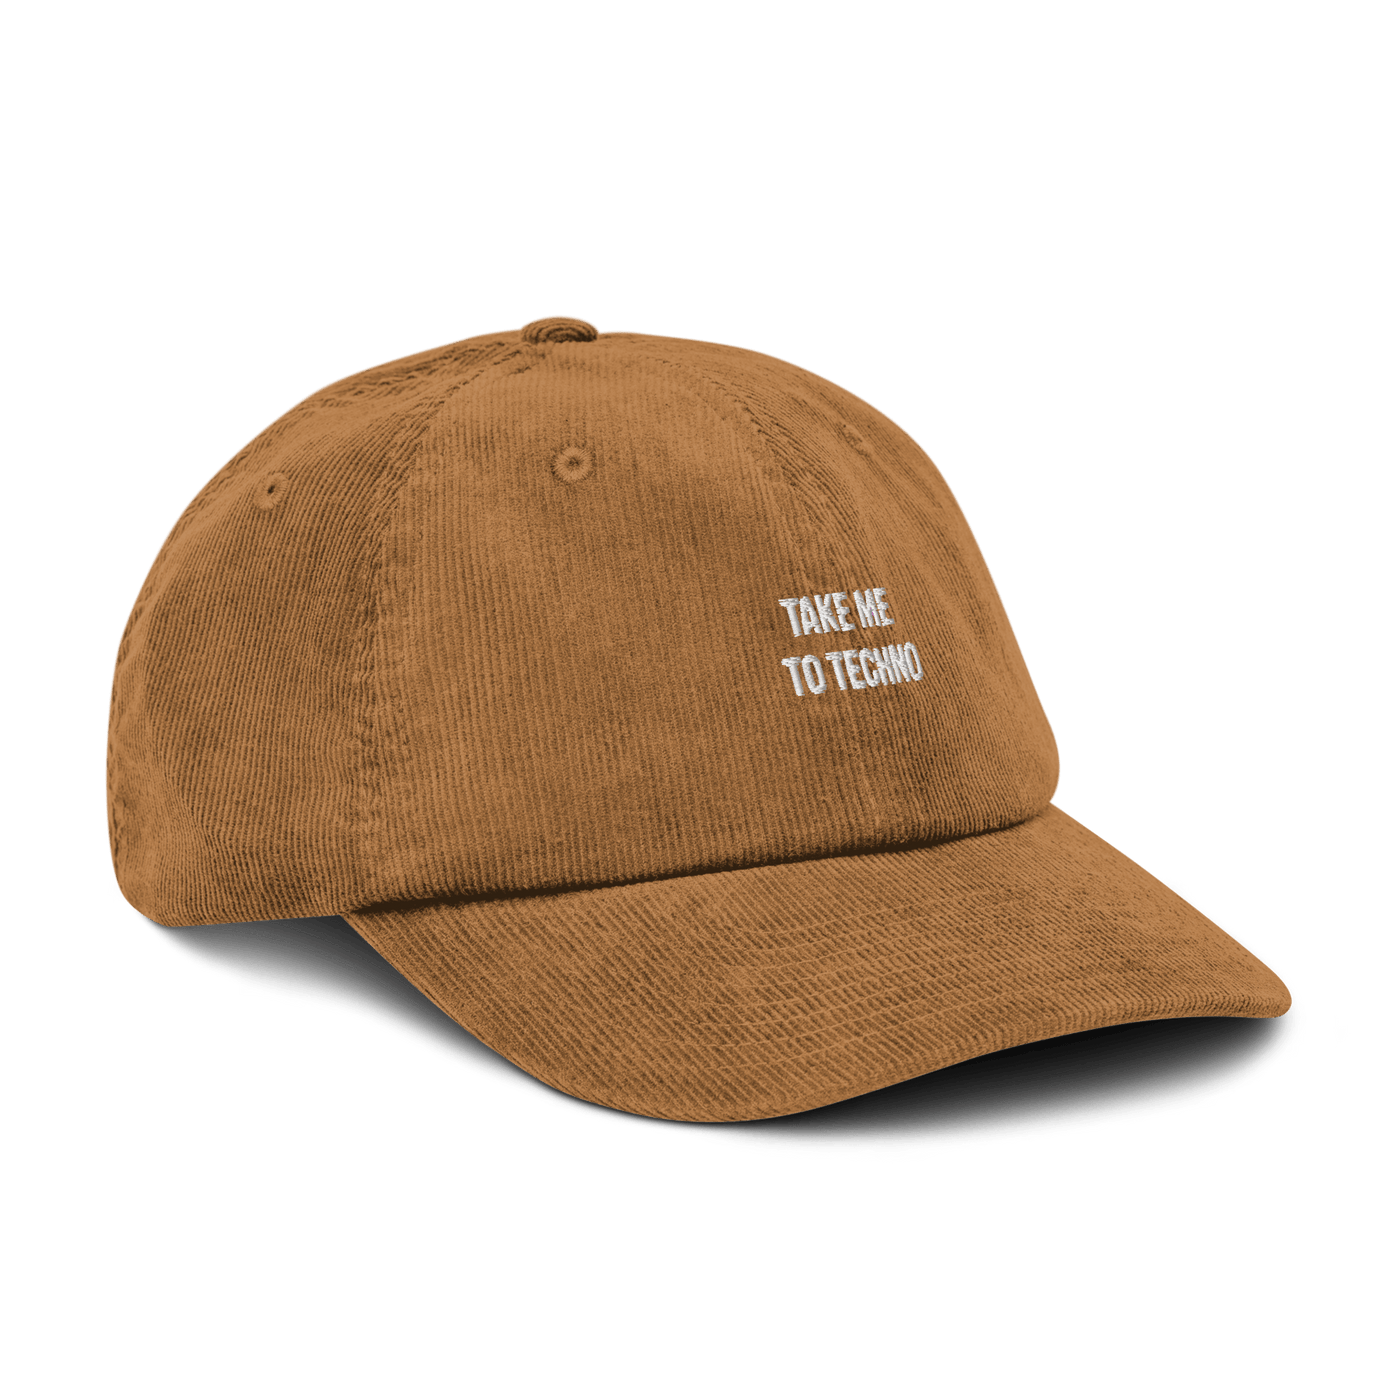 Take me to techno Corduroy hat - Camel - - Just Another Cap Store